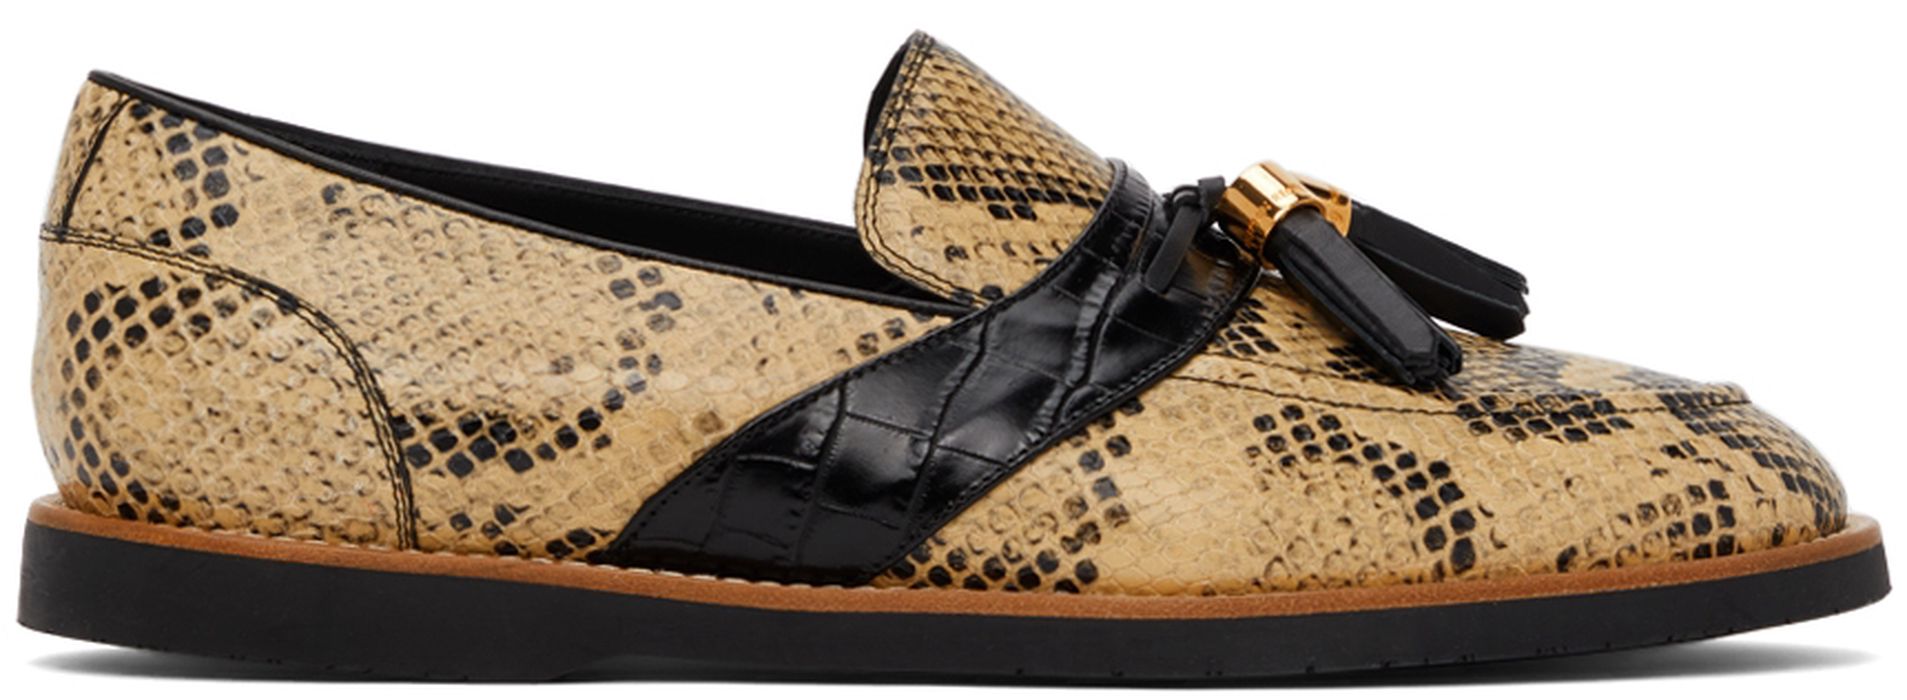 Human Recreational Services Tan & Black Del Ray Rattlesnake Loafers